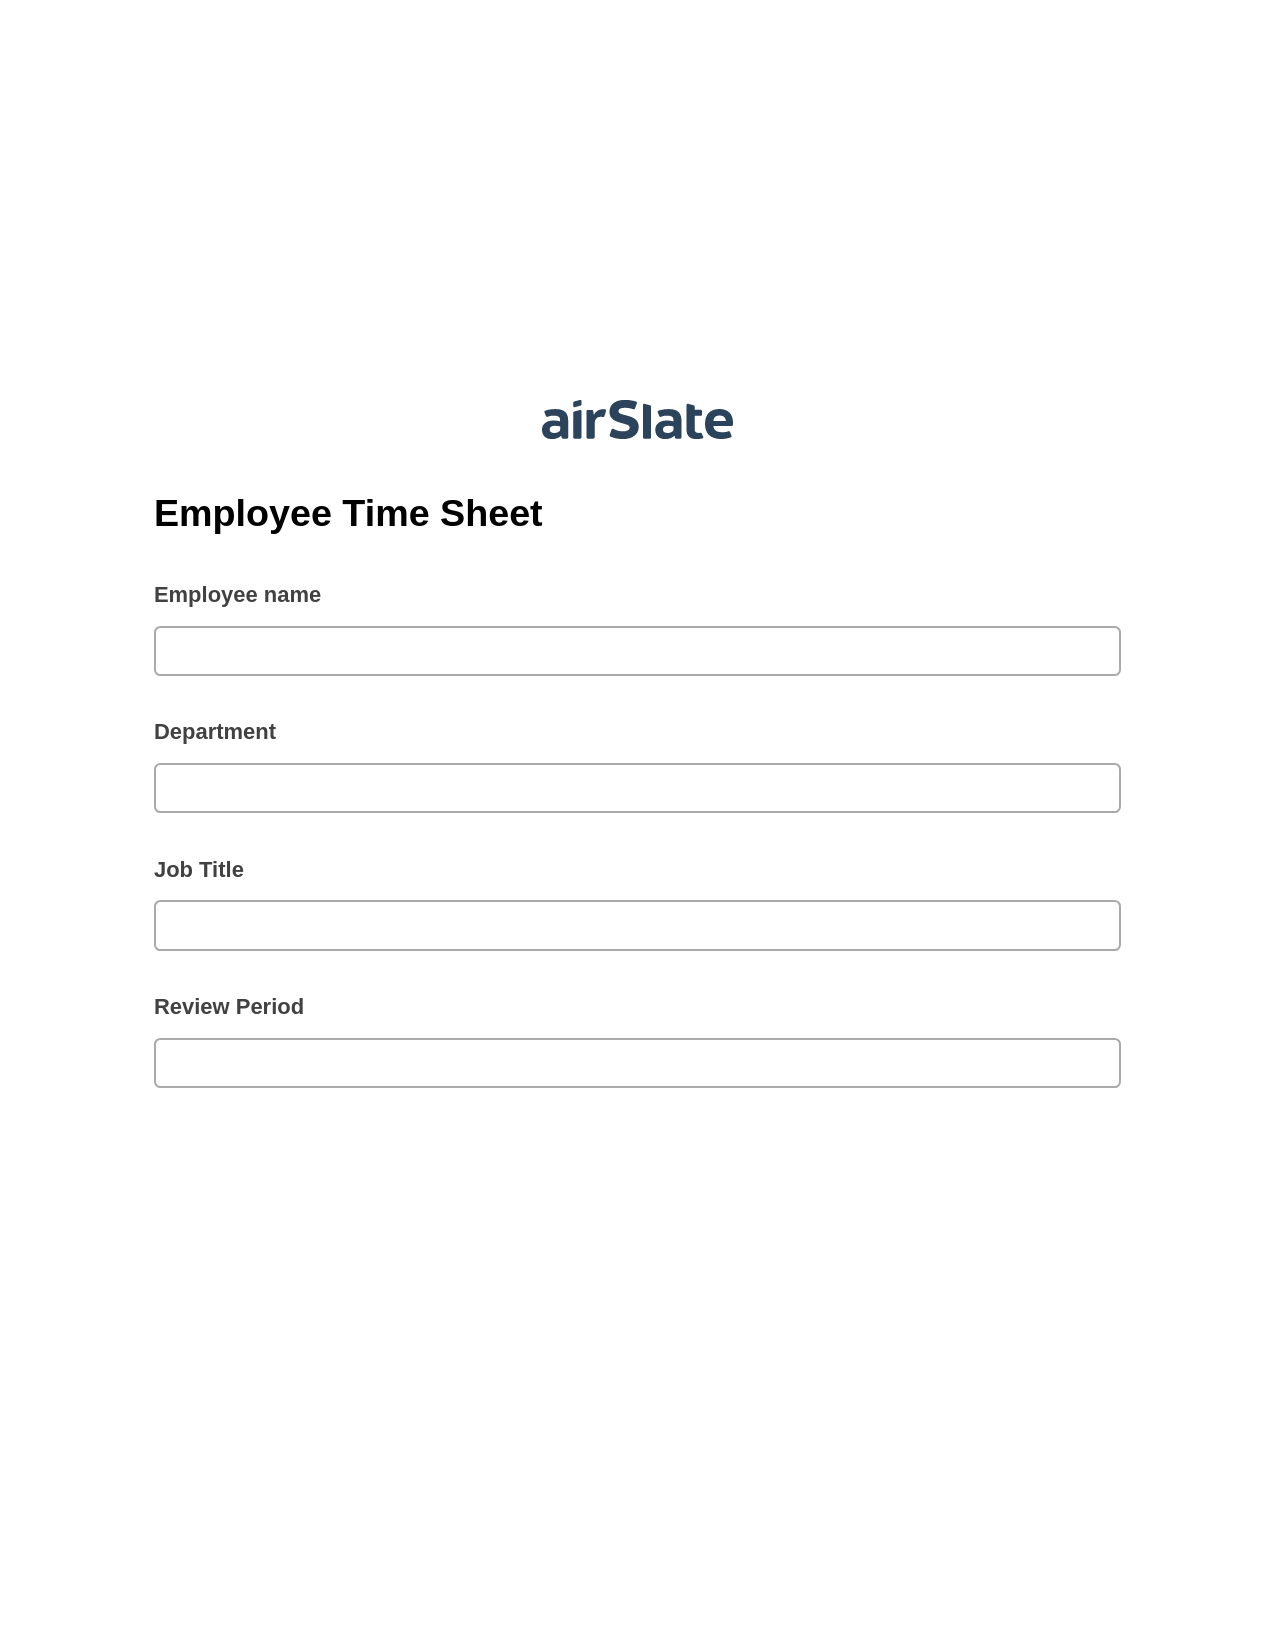 Multirole Employee Time Sheet Prefill from NetSuite records, Create slate addon, Archive to OneDrive Bot